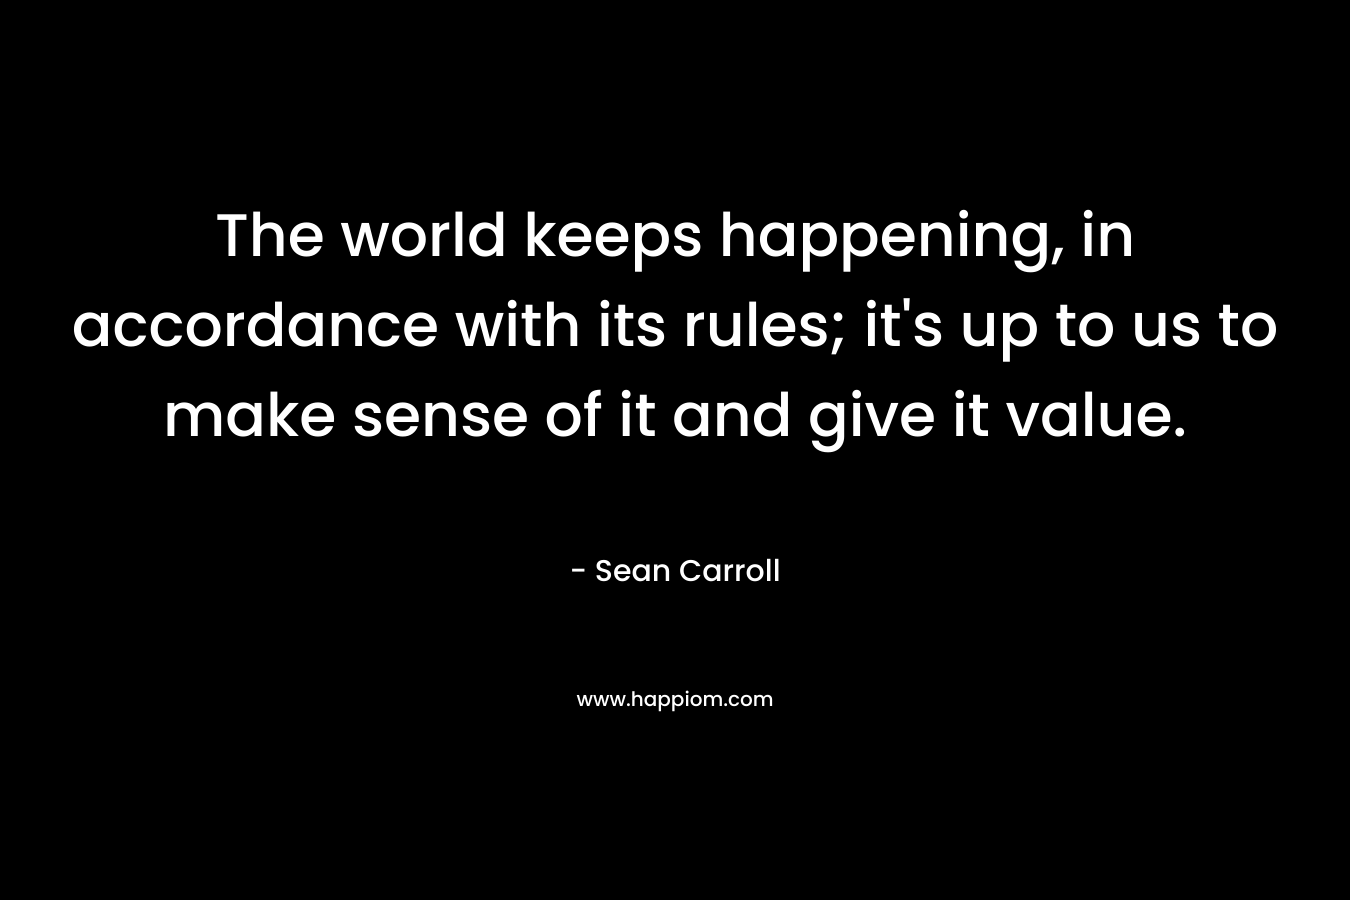 The world keeps happening, in accordance with its rules; it's up to us to make sense of it and give it value.